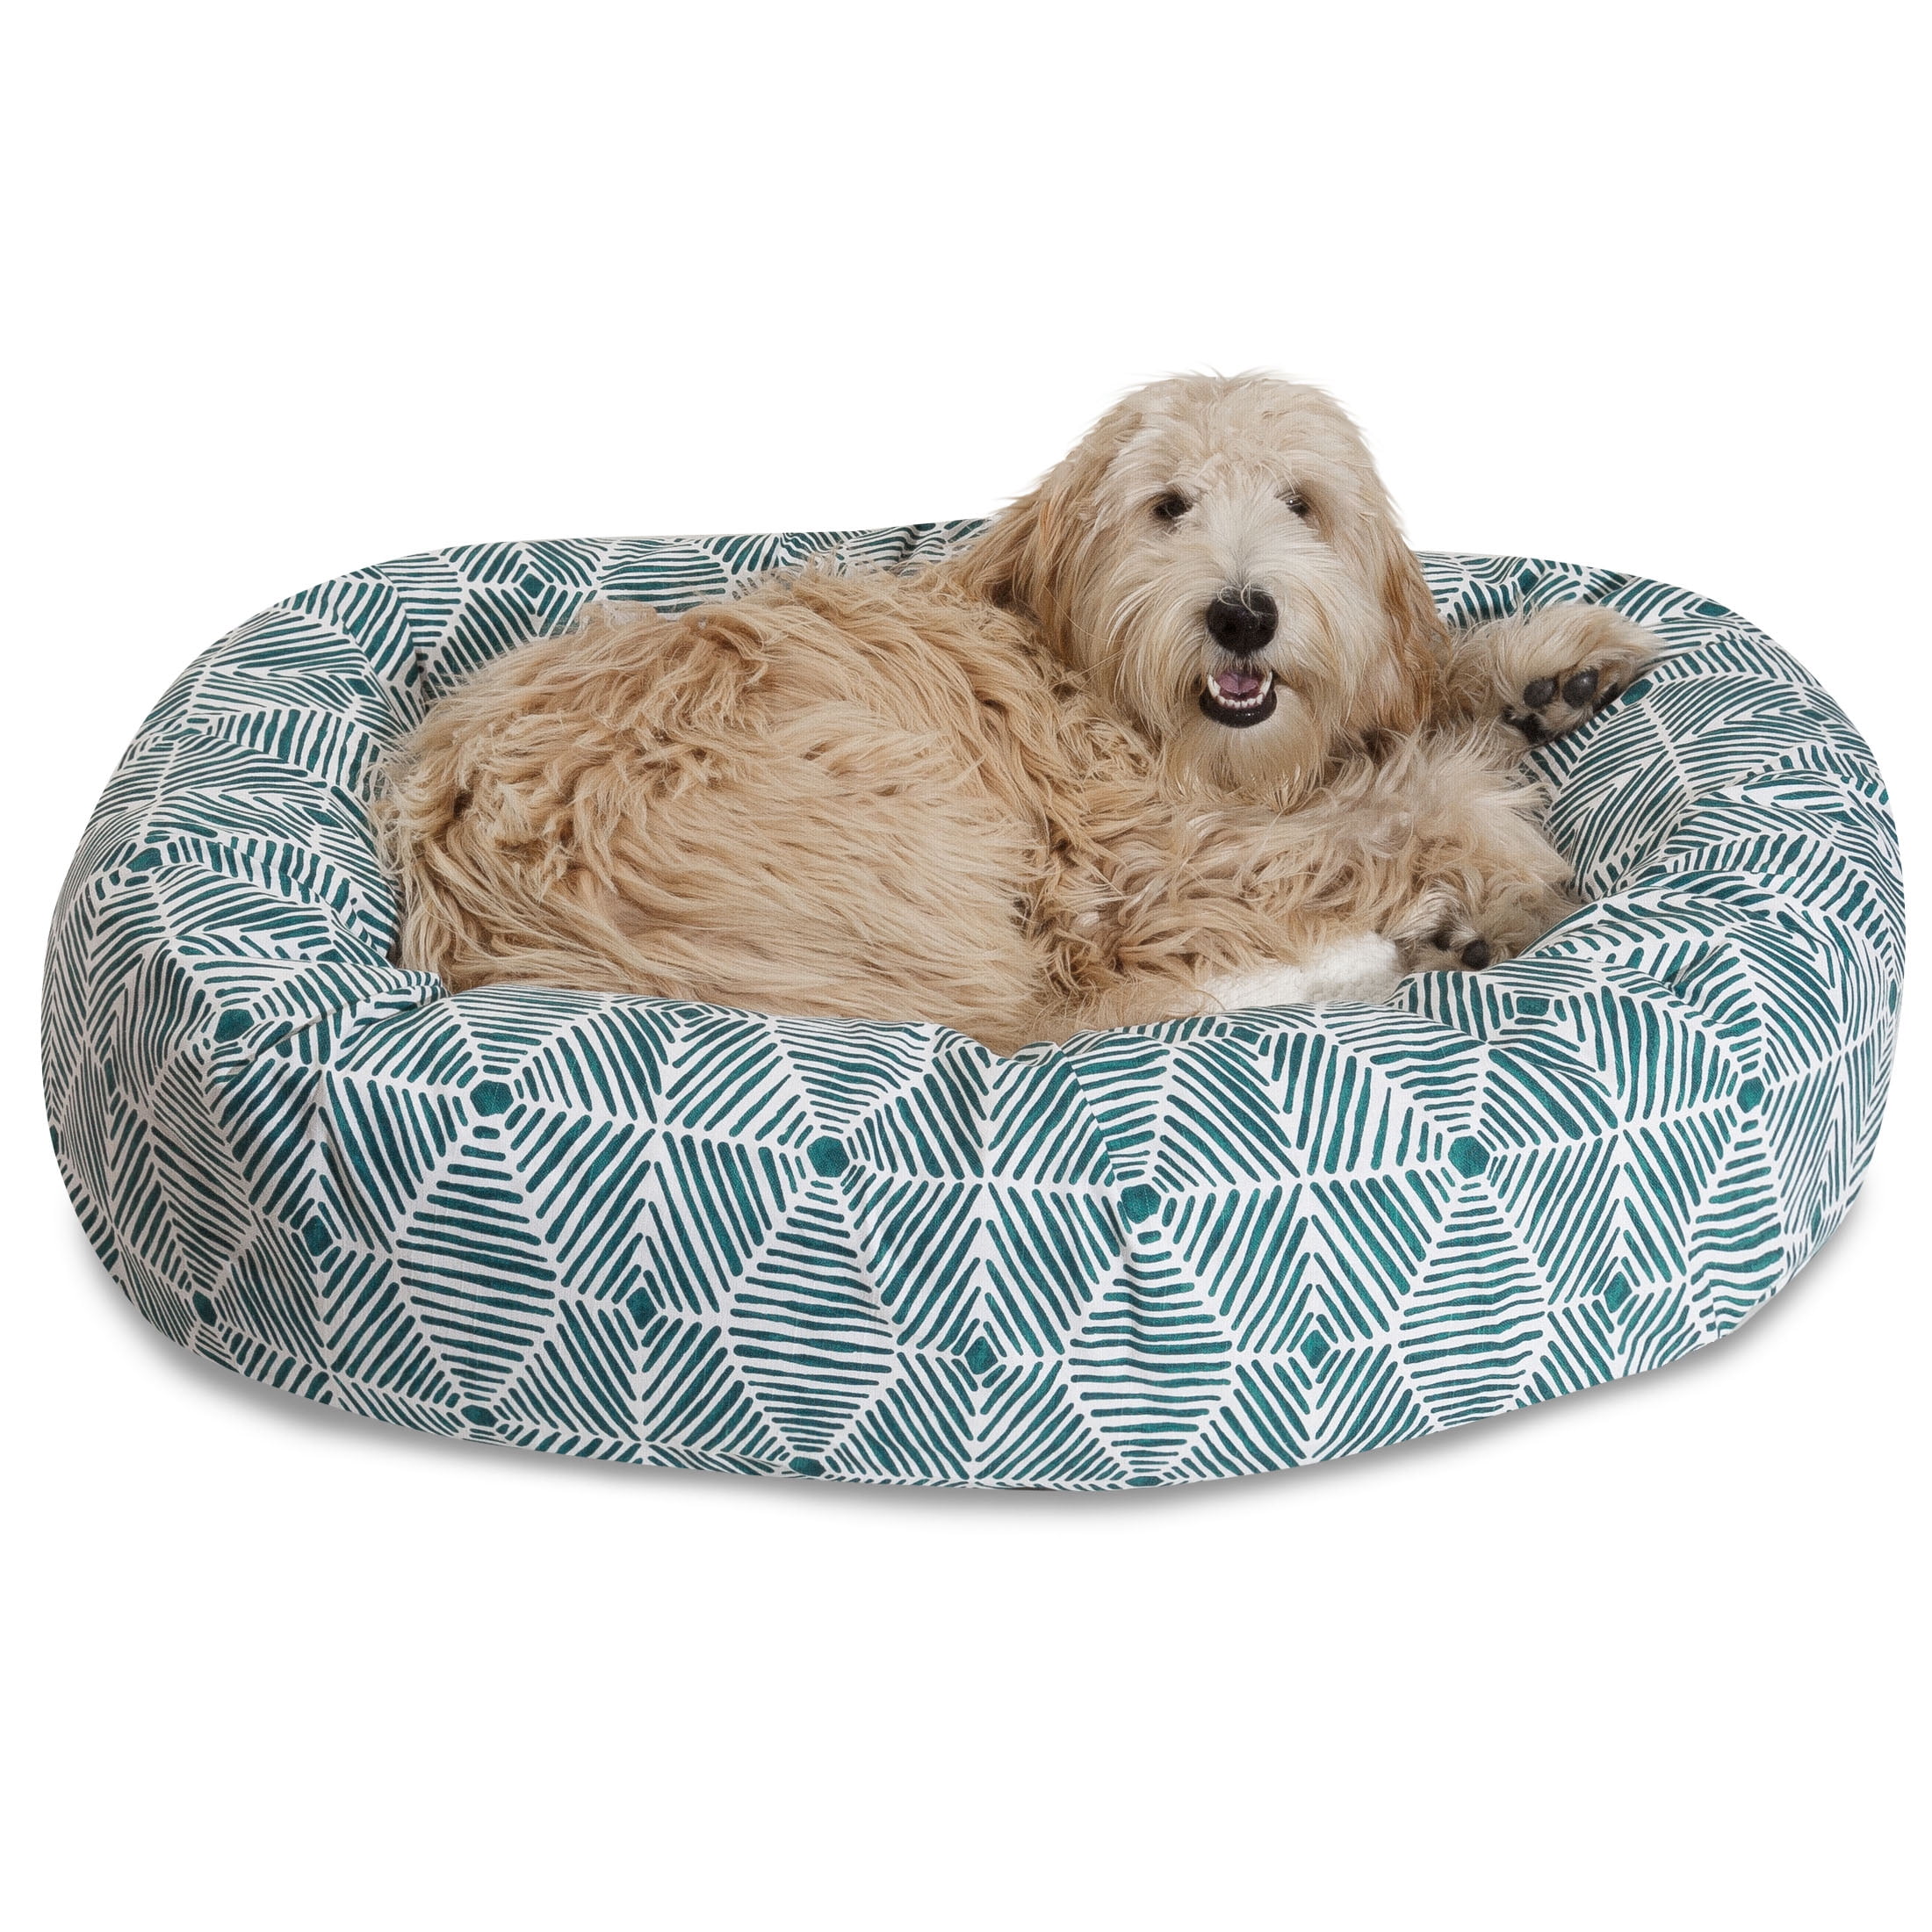 Majestic Pet Charlie Sherpa Bagel Pet Bed For Dogs, Emerald, Small 